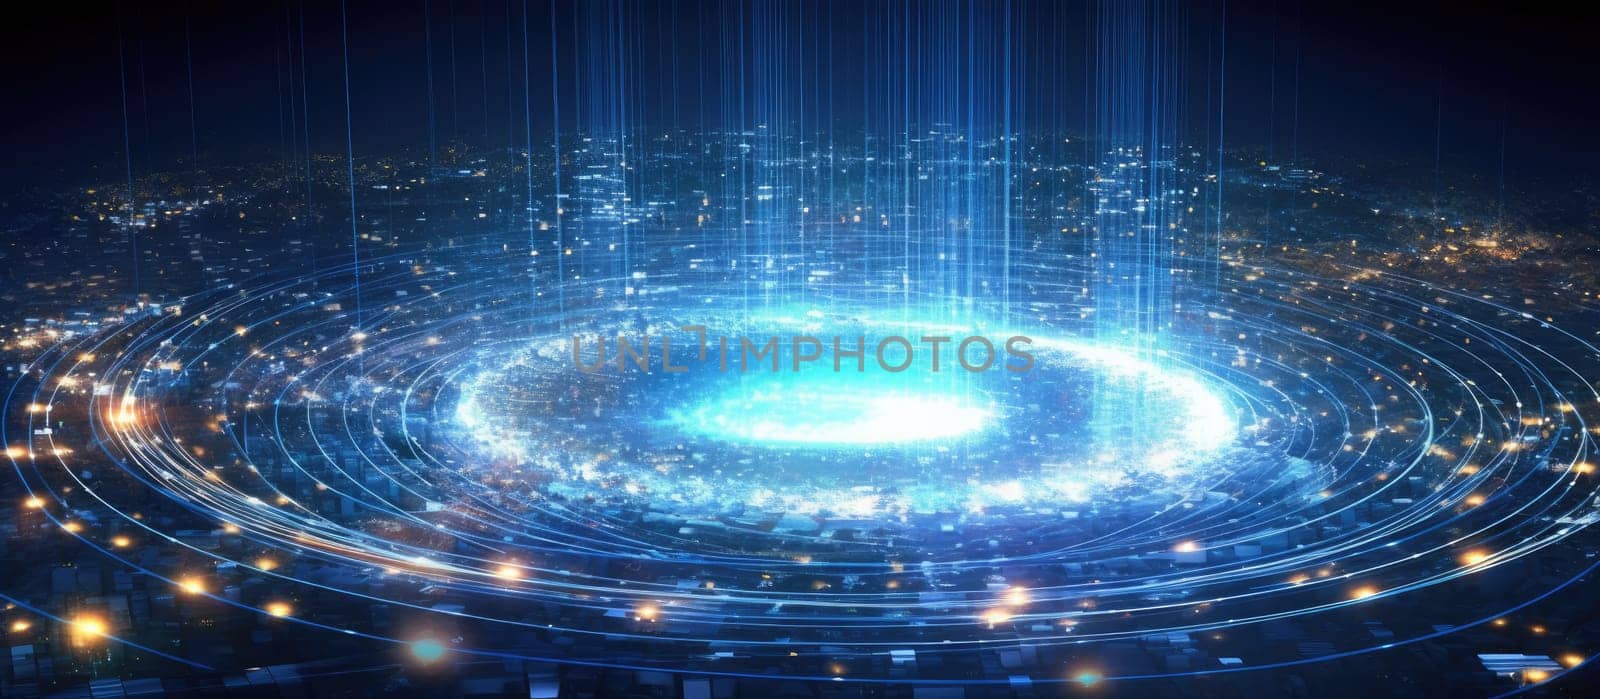 Beautiful technological background of luminous spheres and other elements